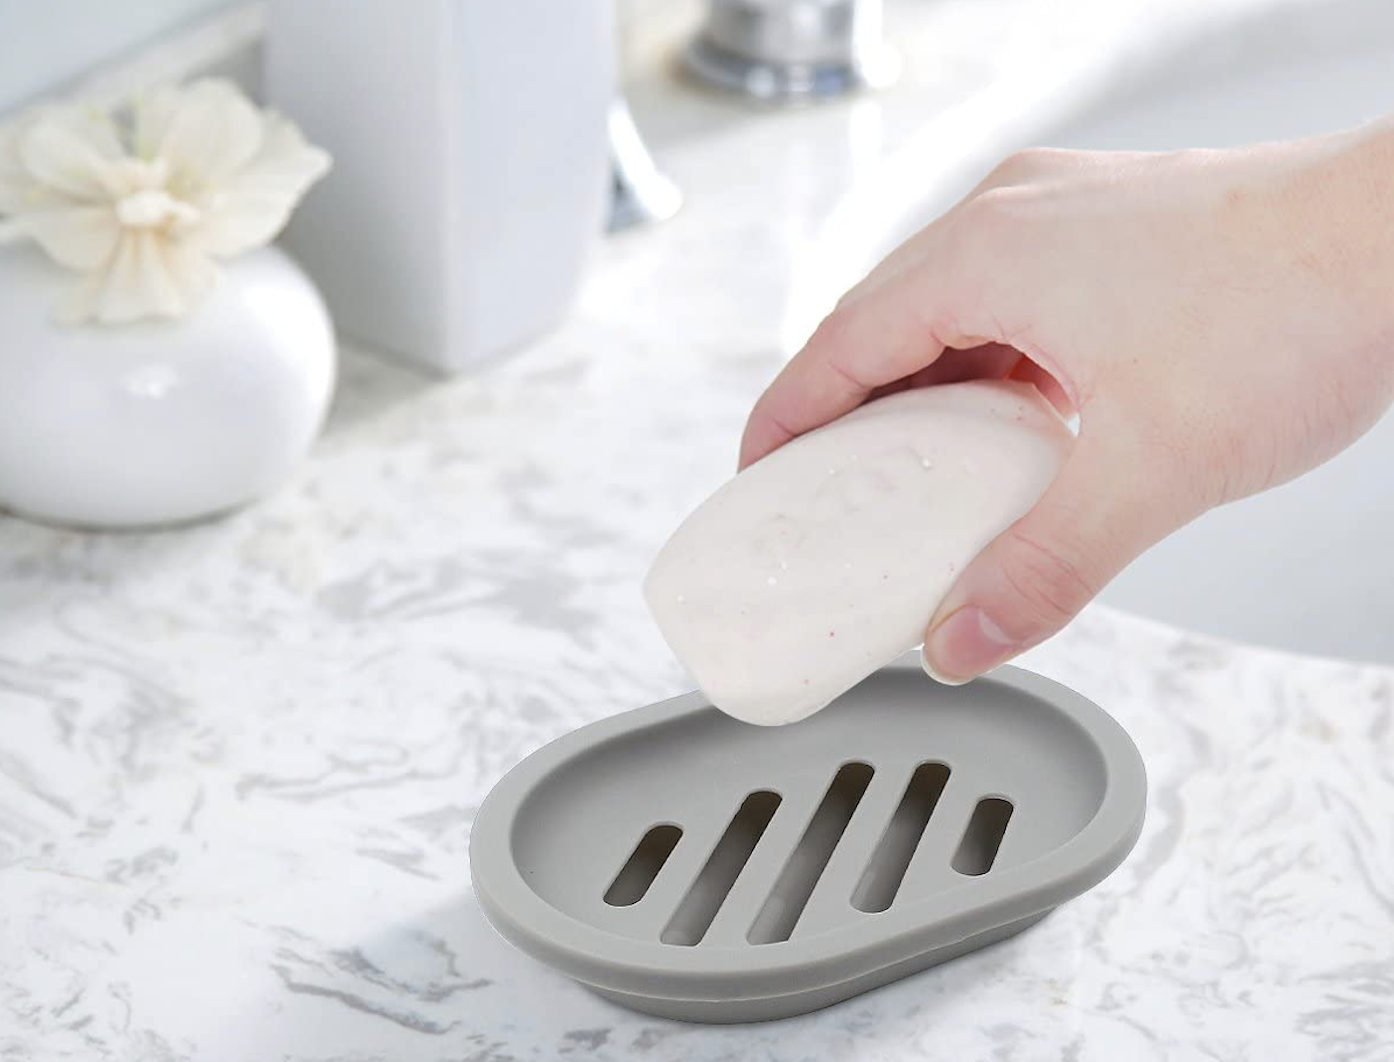 The best soap dishes